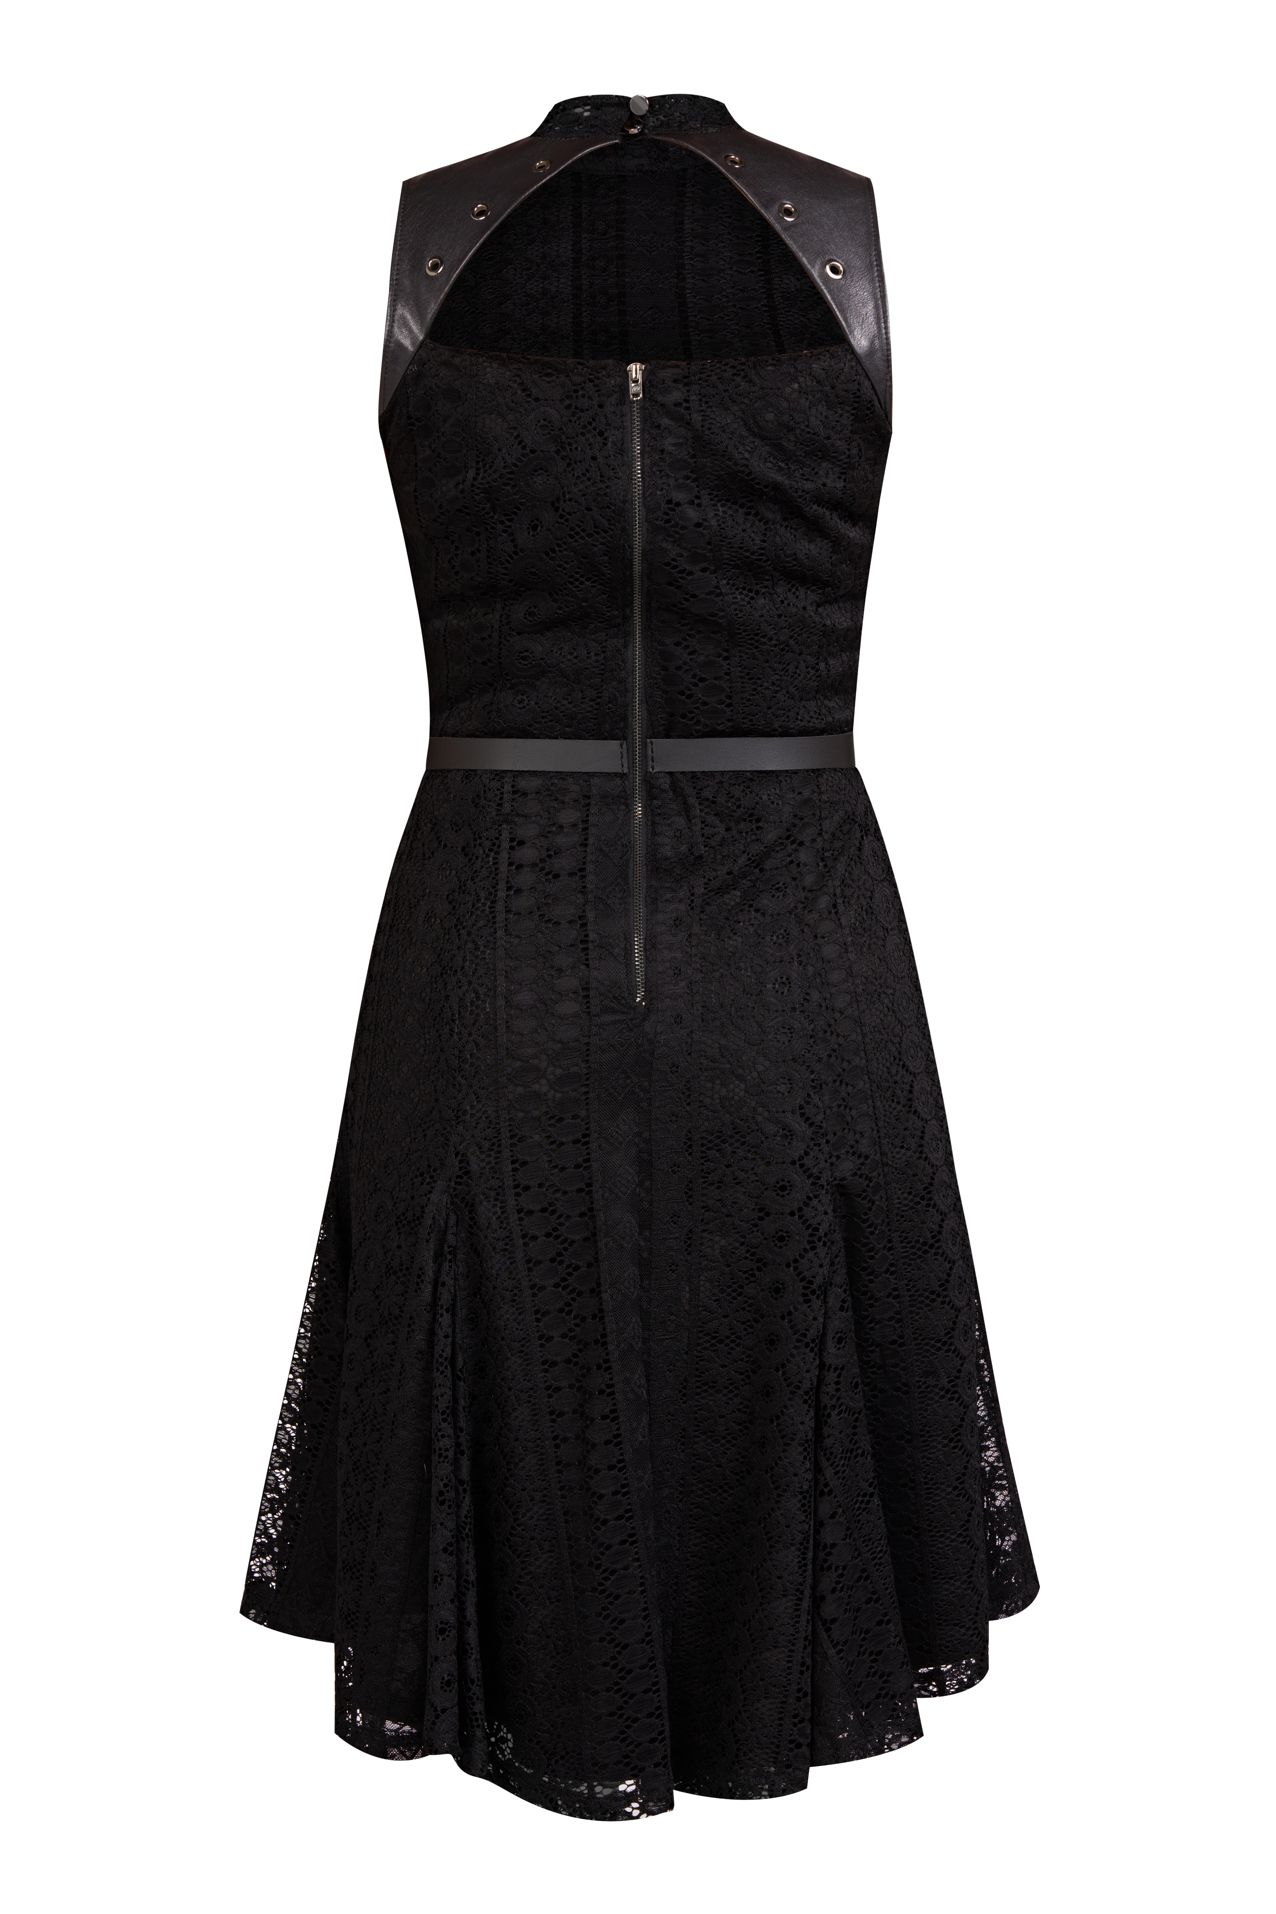 121006 BLACK LACE DRESS WITH GODETS image 4